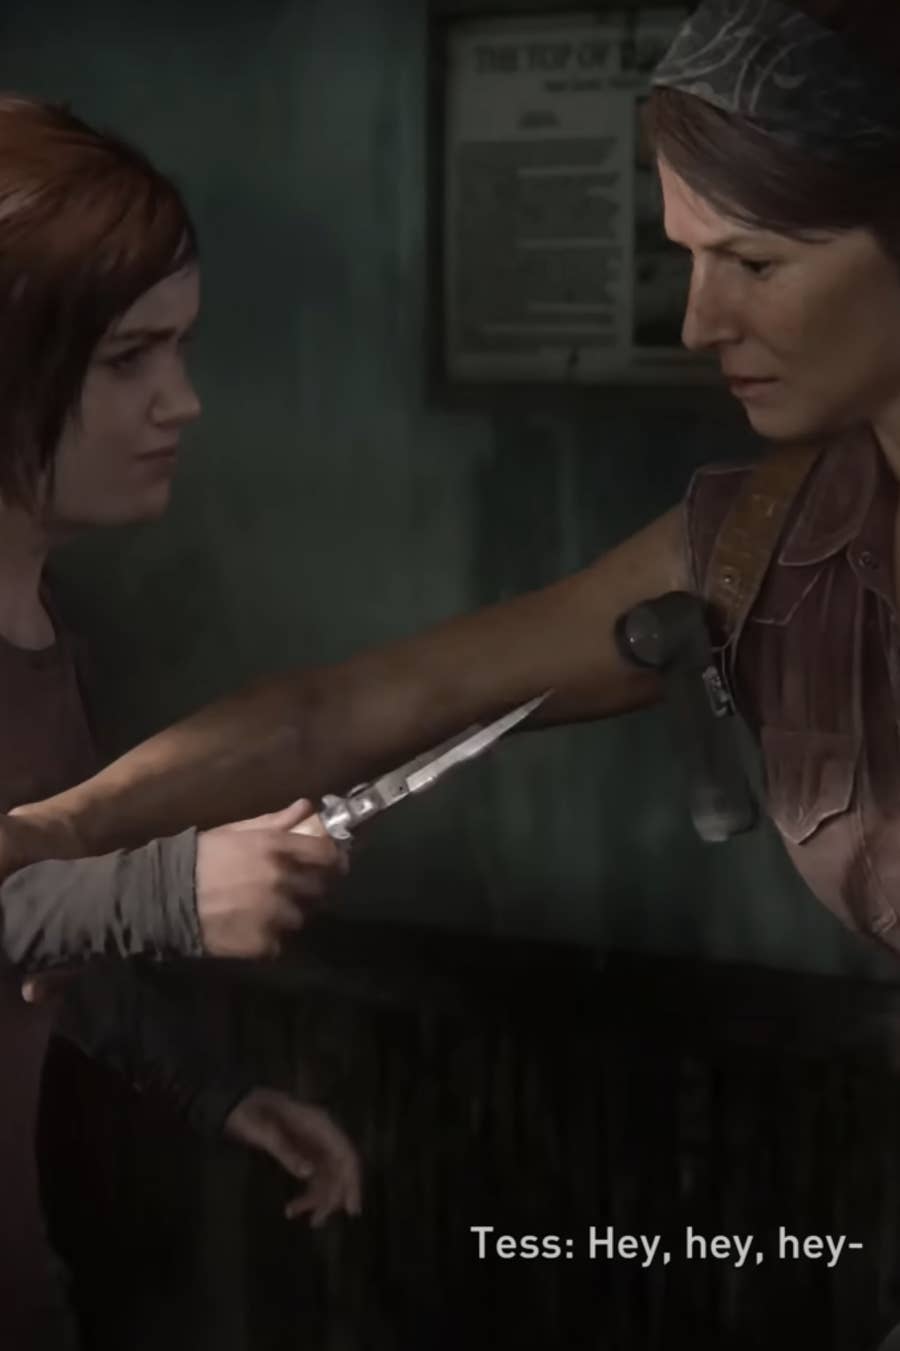 The Last of Us' Show vs. Video Game: Production Designer Says